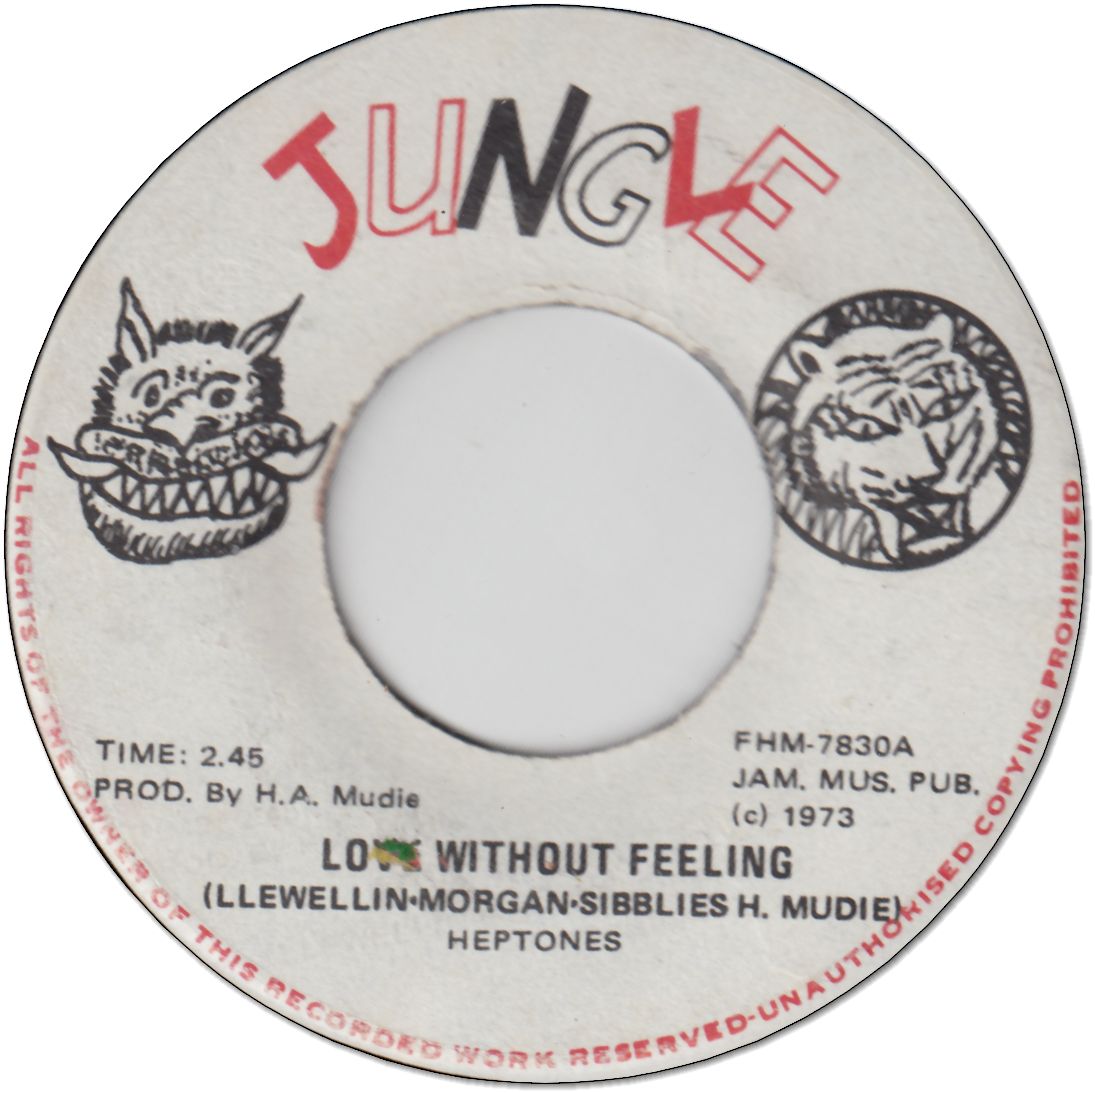 LOVE WITHOUT FEELING (VG+) / JUNGLE FEELING (VG+)